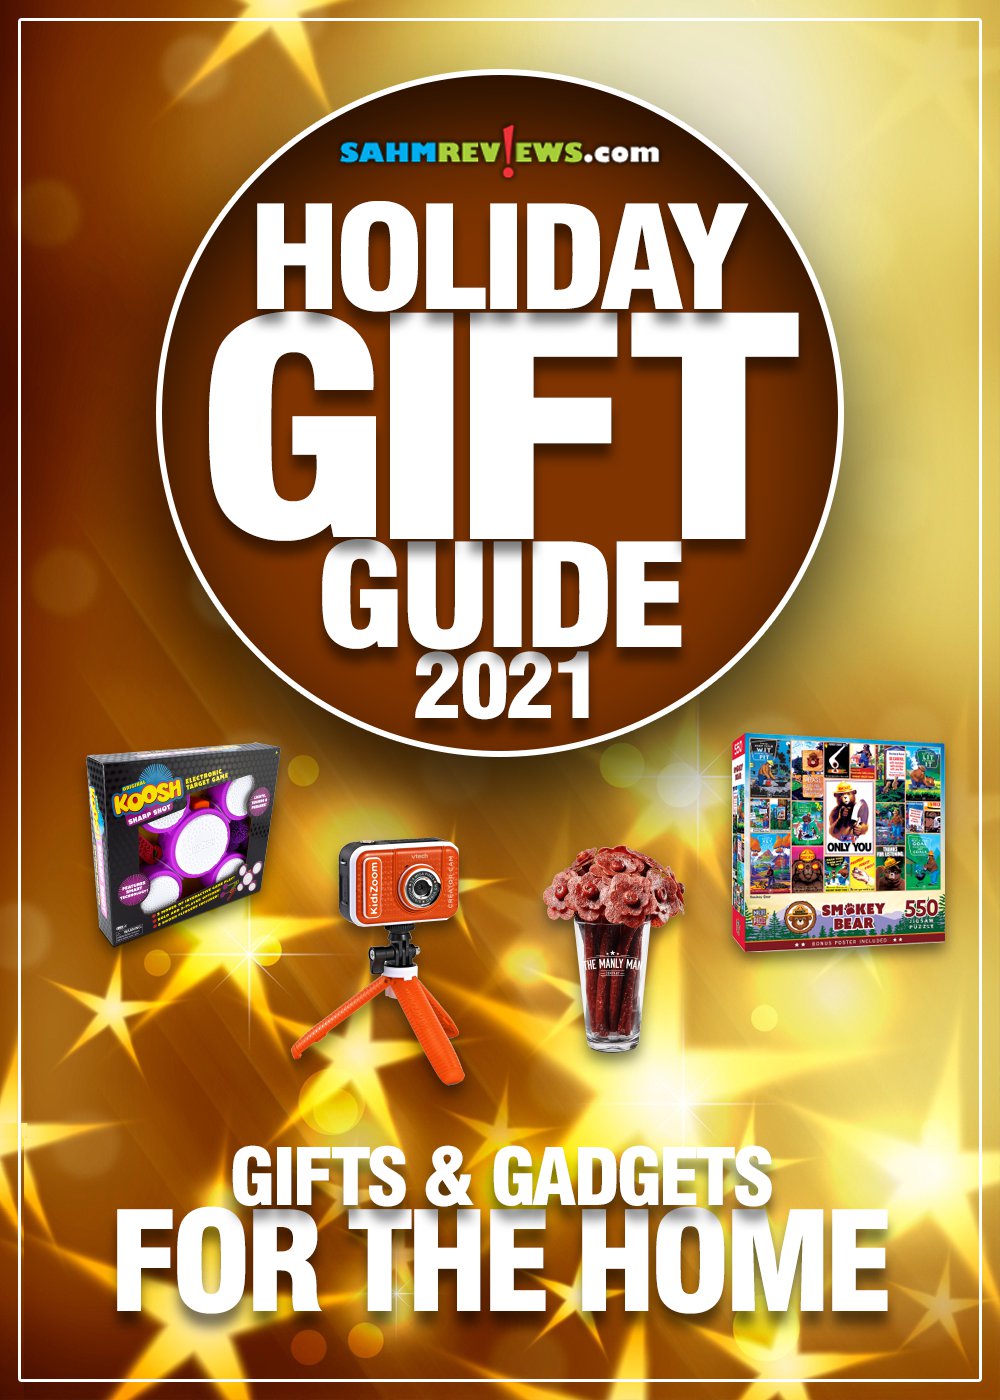 Buying for a significant other (or yourself) can be daunting. Here are a few ideas for home & electronics gifts in our annual Gift Guide! - SahmReviews.com